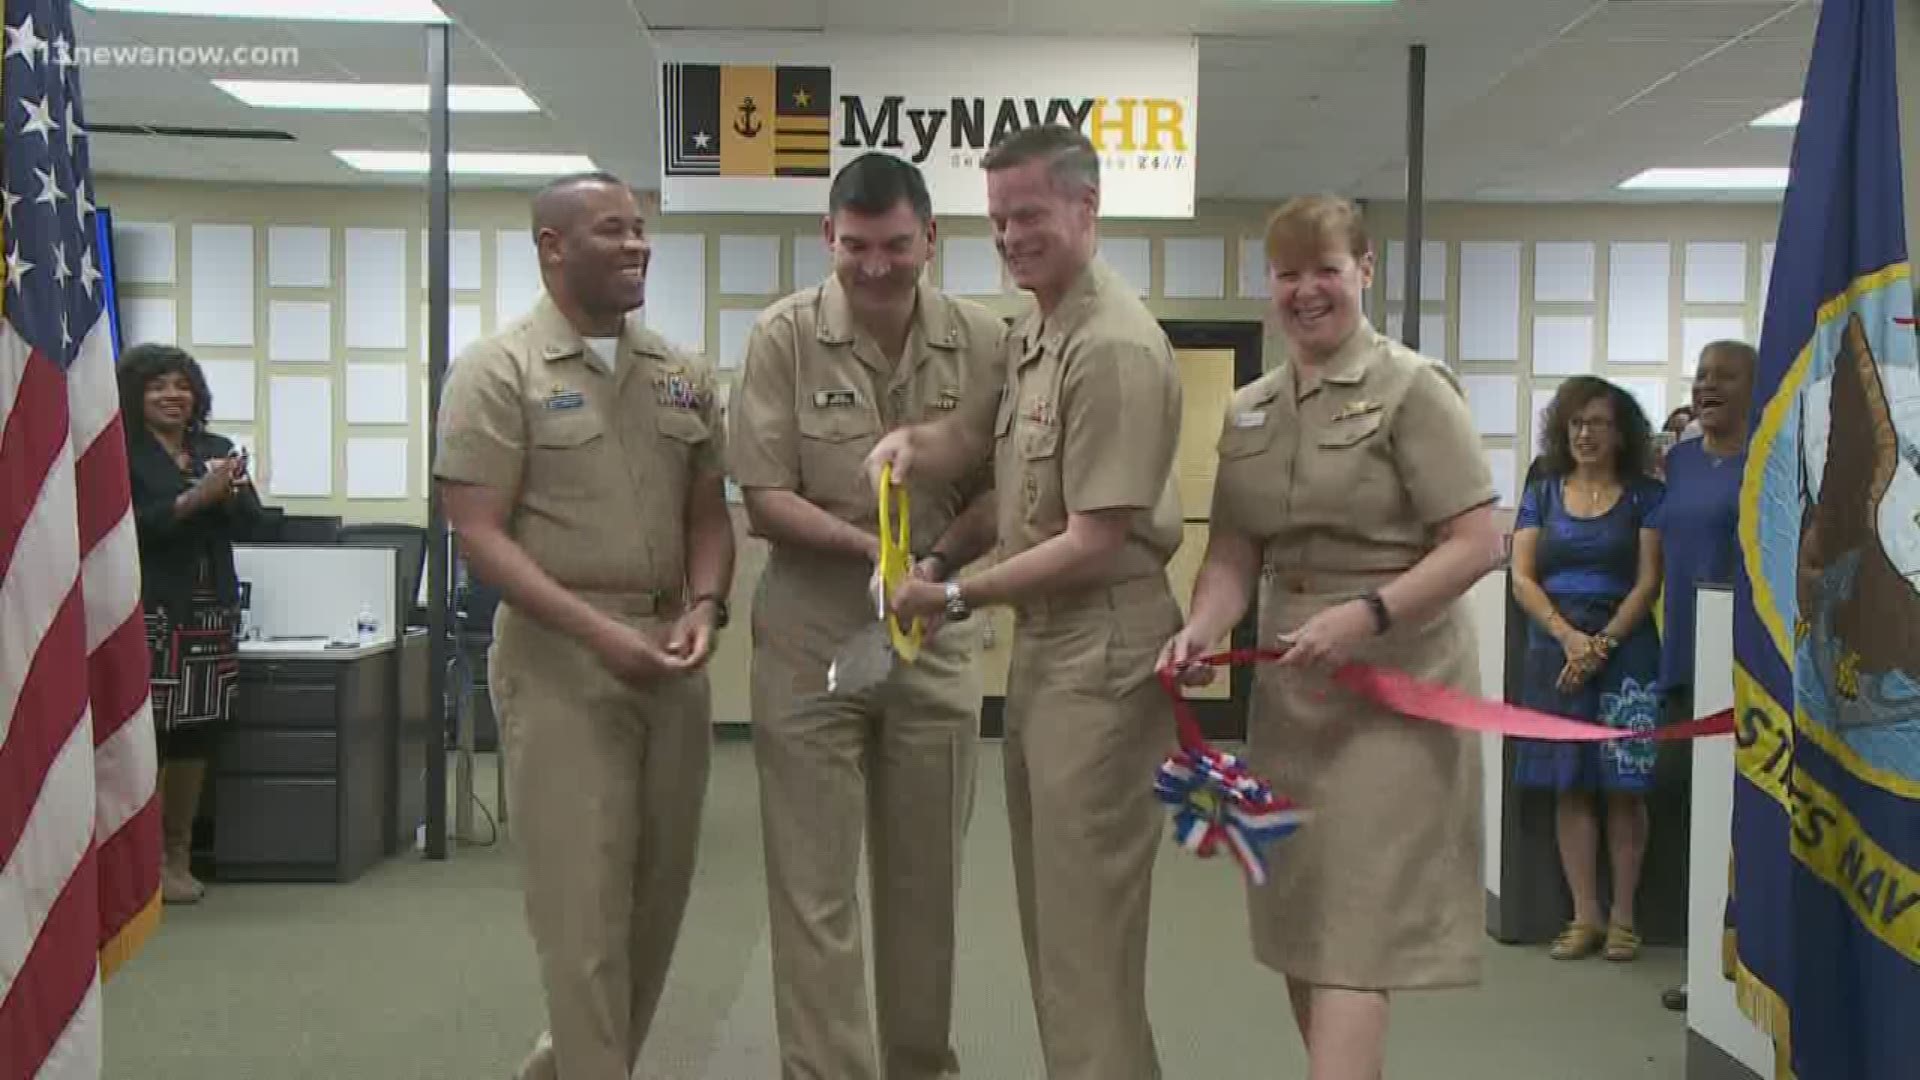 MyNavy Career Centers launched at JEB Little Creek-Fort Story. The call center will be open 24/7. This is the second MyNavy Career Center for the military branch.